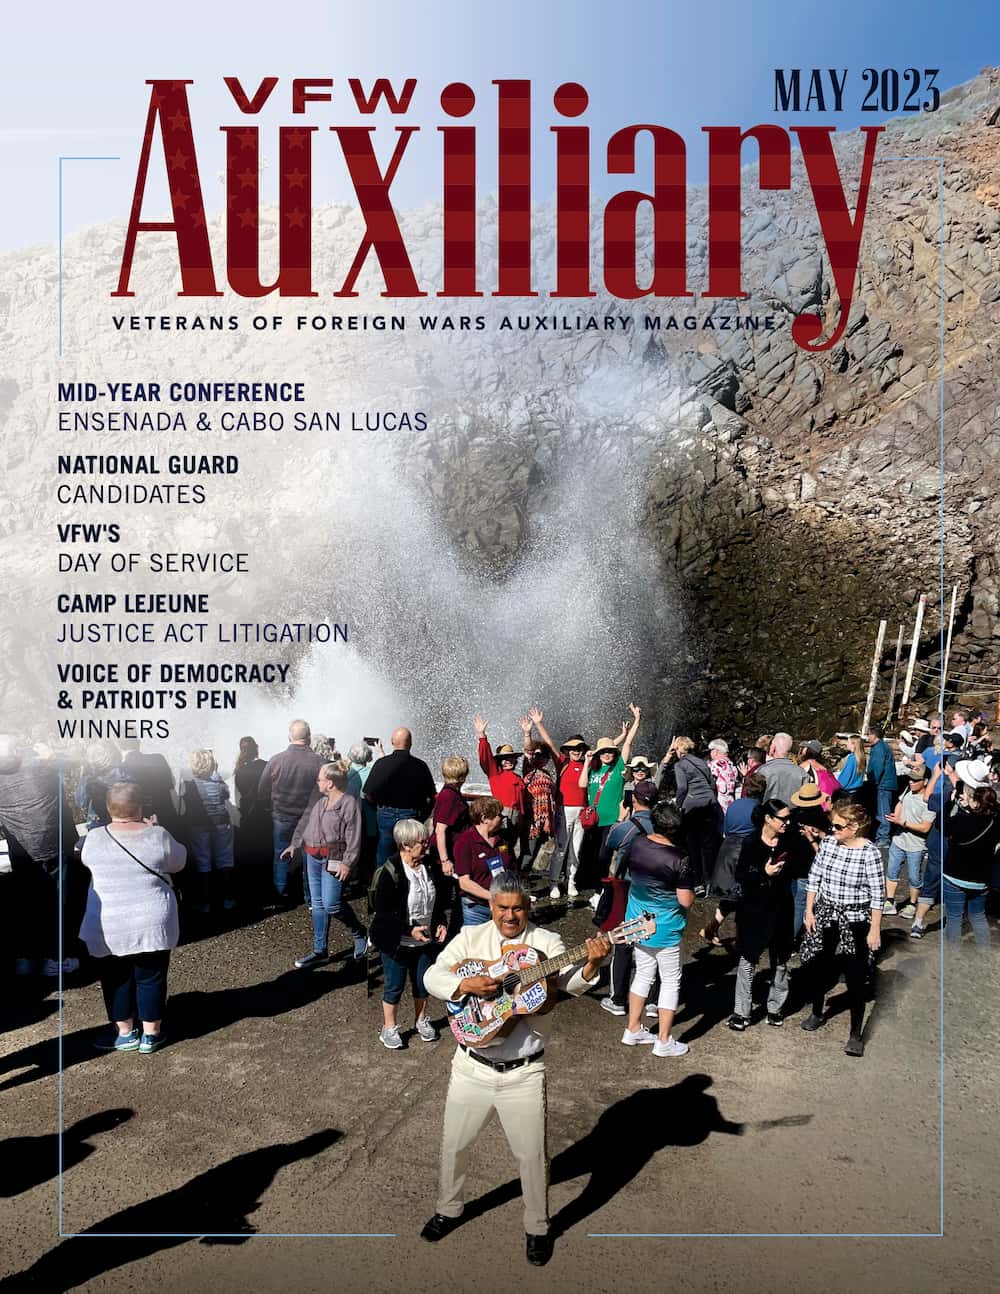 VFW Auxiliary Magazine, May 2023 cover.